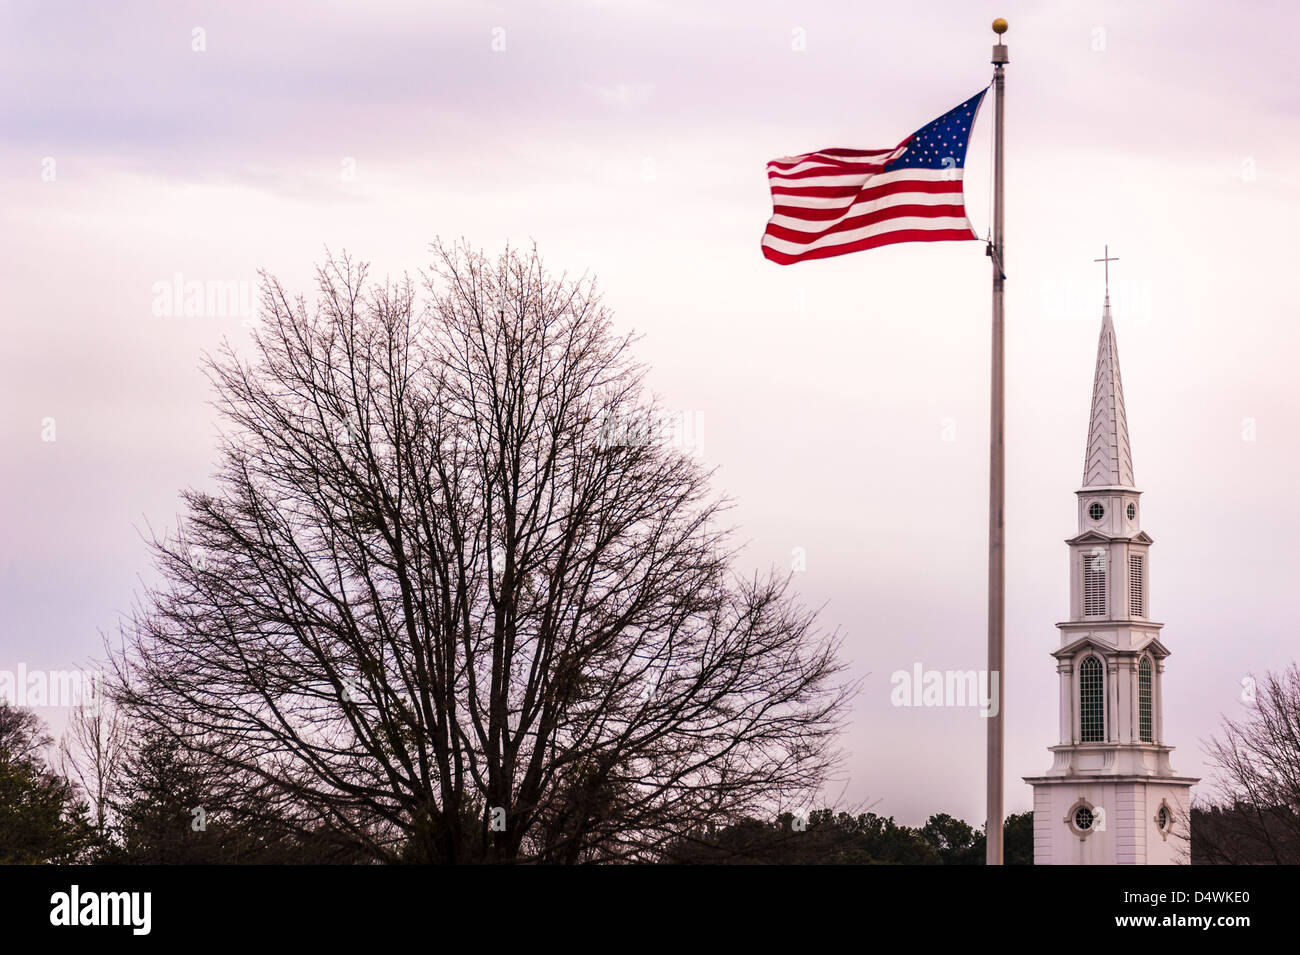 Community values of faith and patriotism are seen in the symbols of a waving flag and cross-topped steeple. Stock Photo